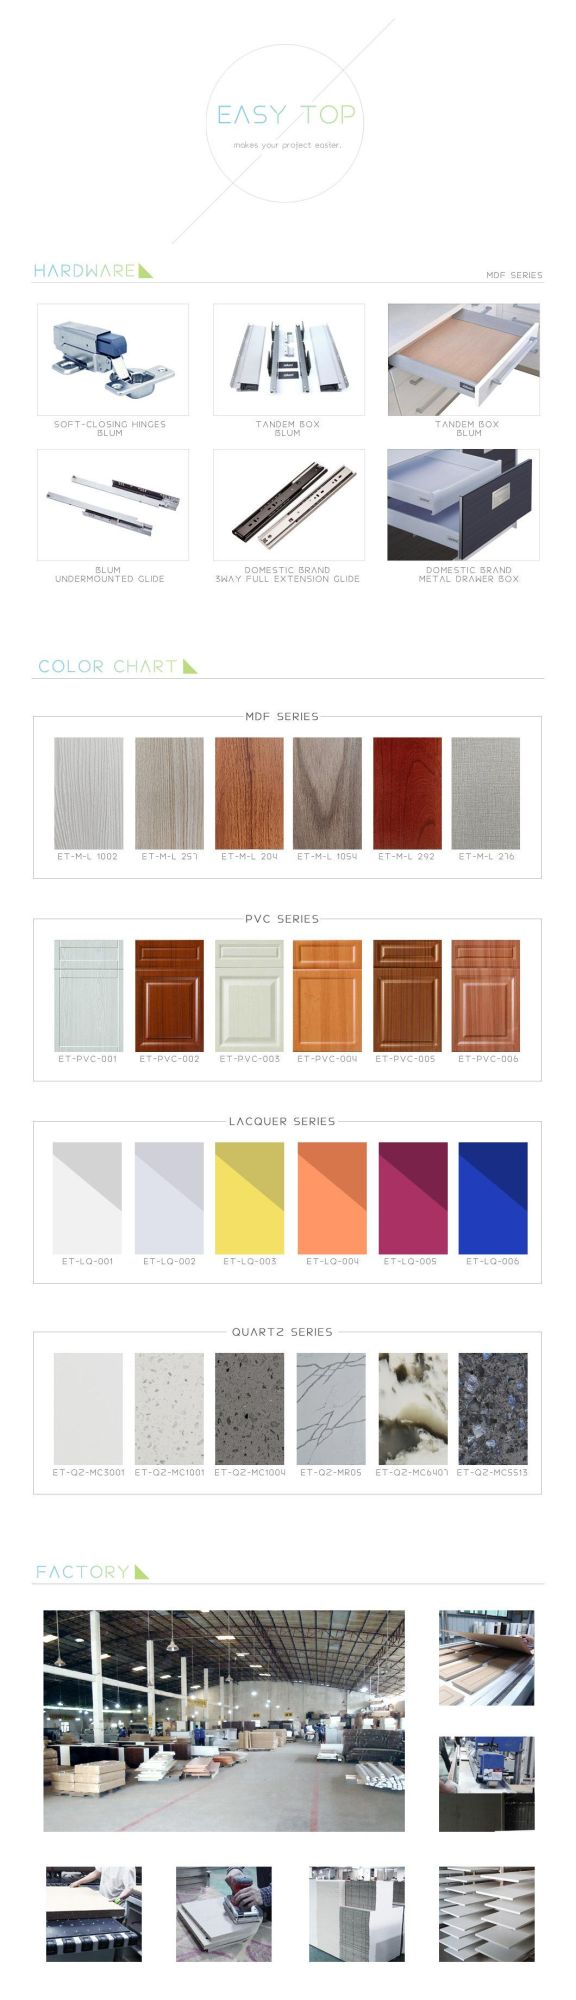 Traditional Wood Decals Modern Home Furniture Cupboard Kitchen Unit Cabinet Guangzhou